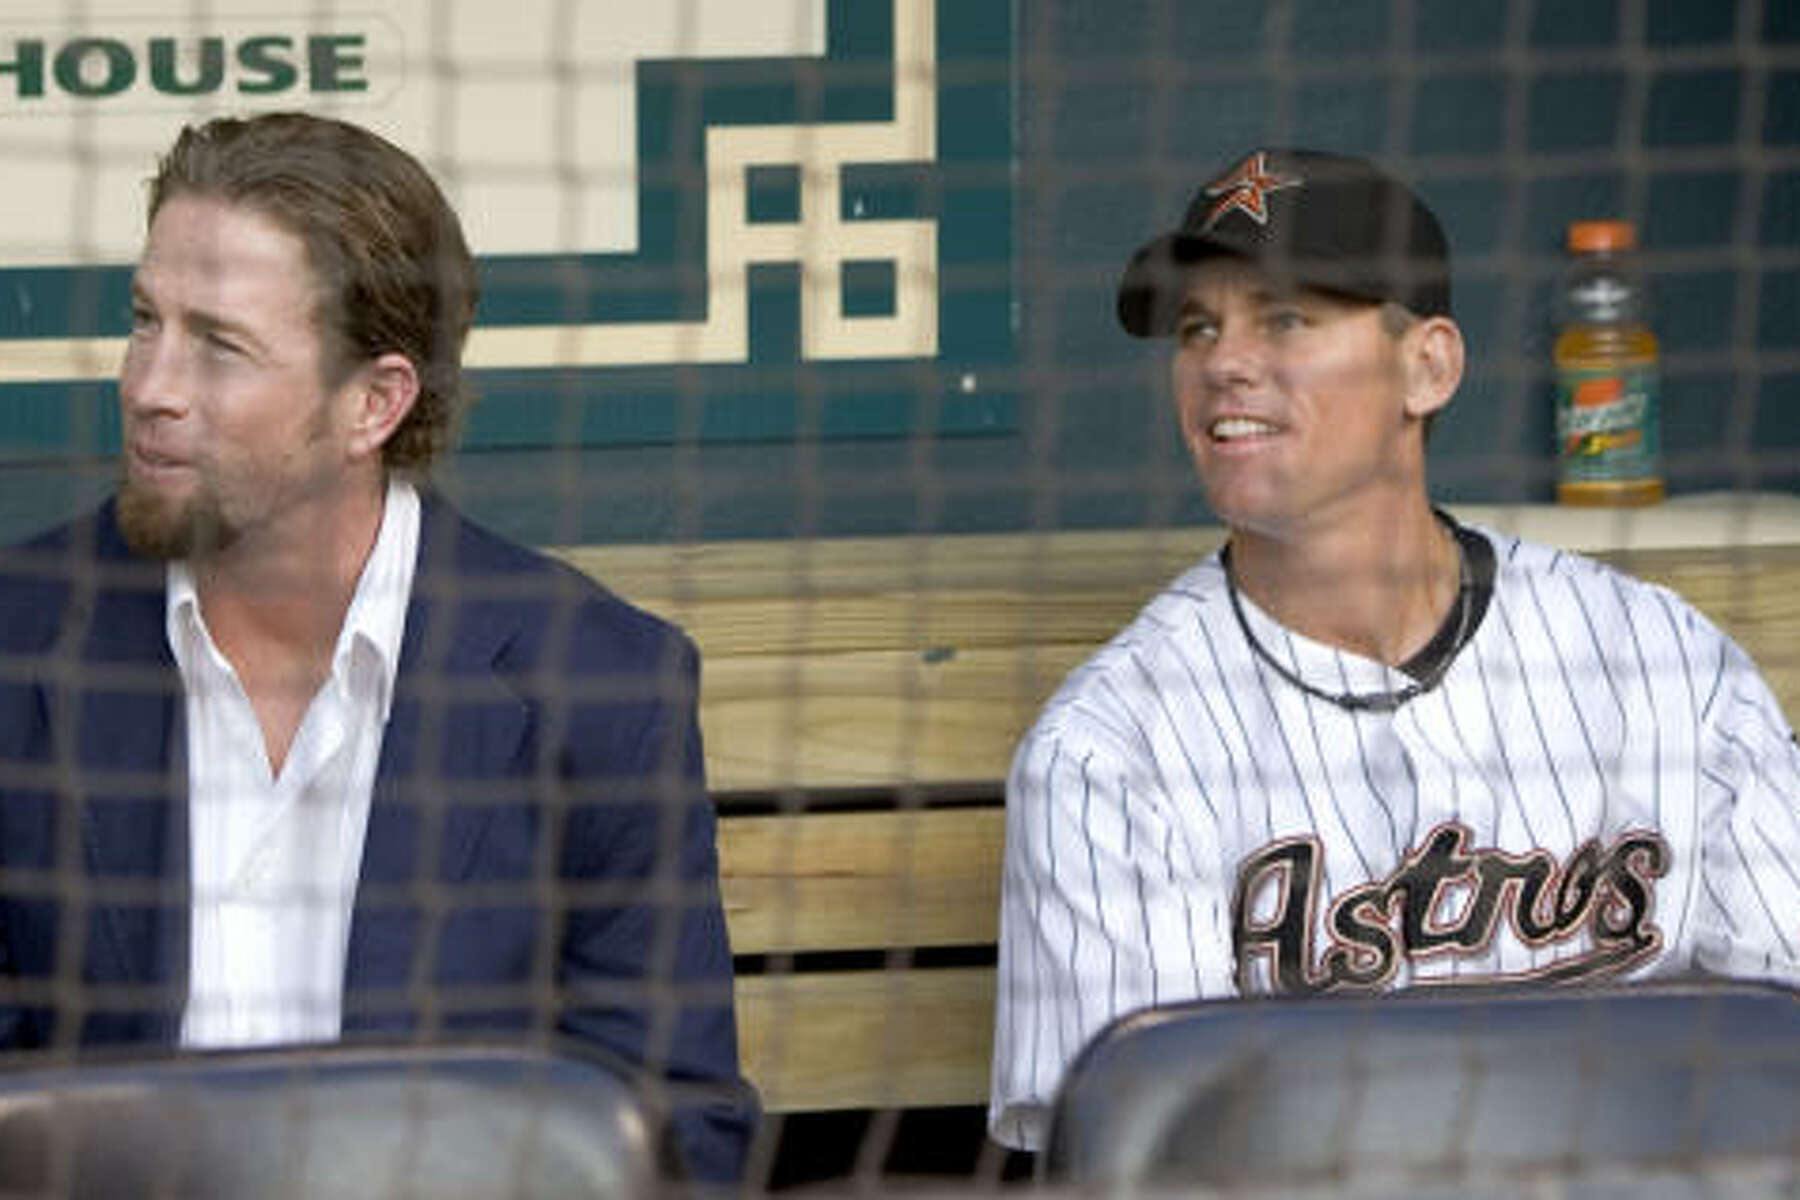 Ausmus, Bagwell, Biggio, Kent among A-listers headed back to Minute Maid  Park in '12., by MLB.com/blogs